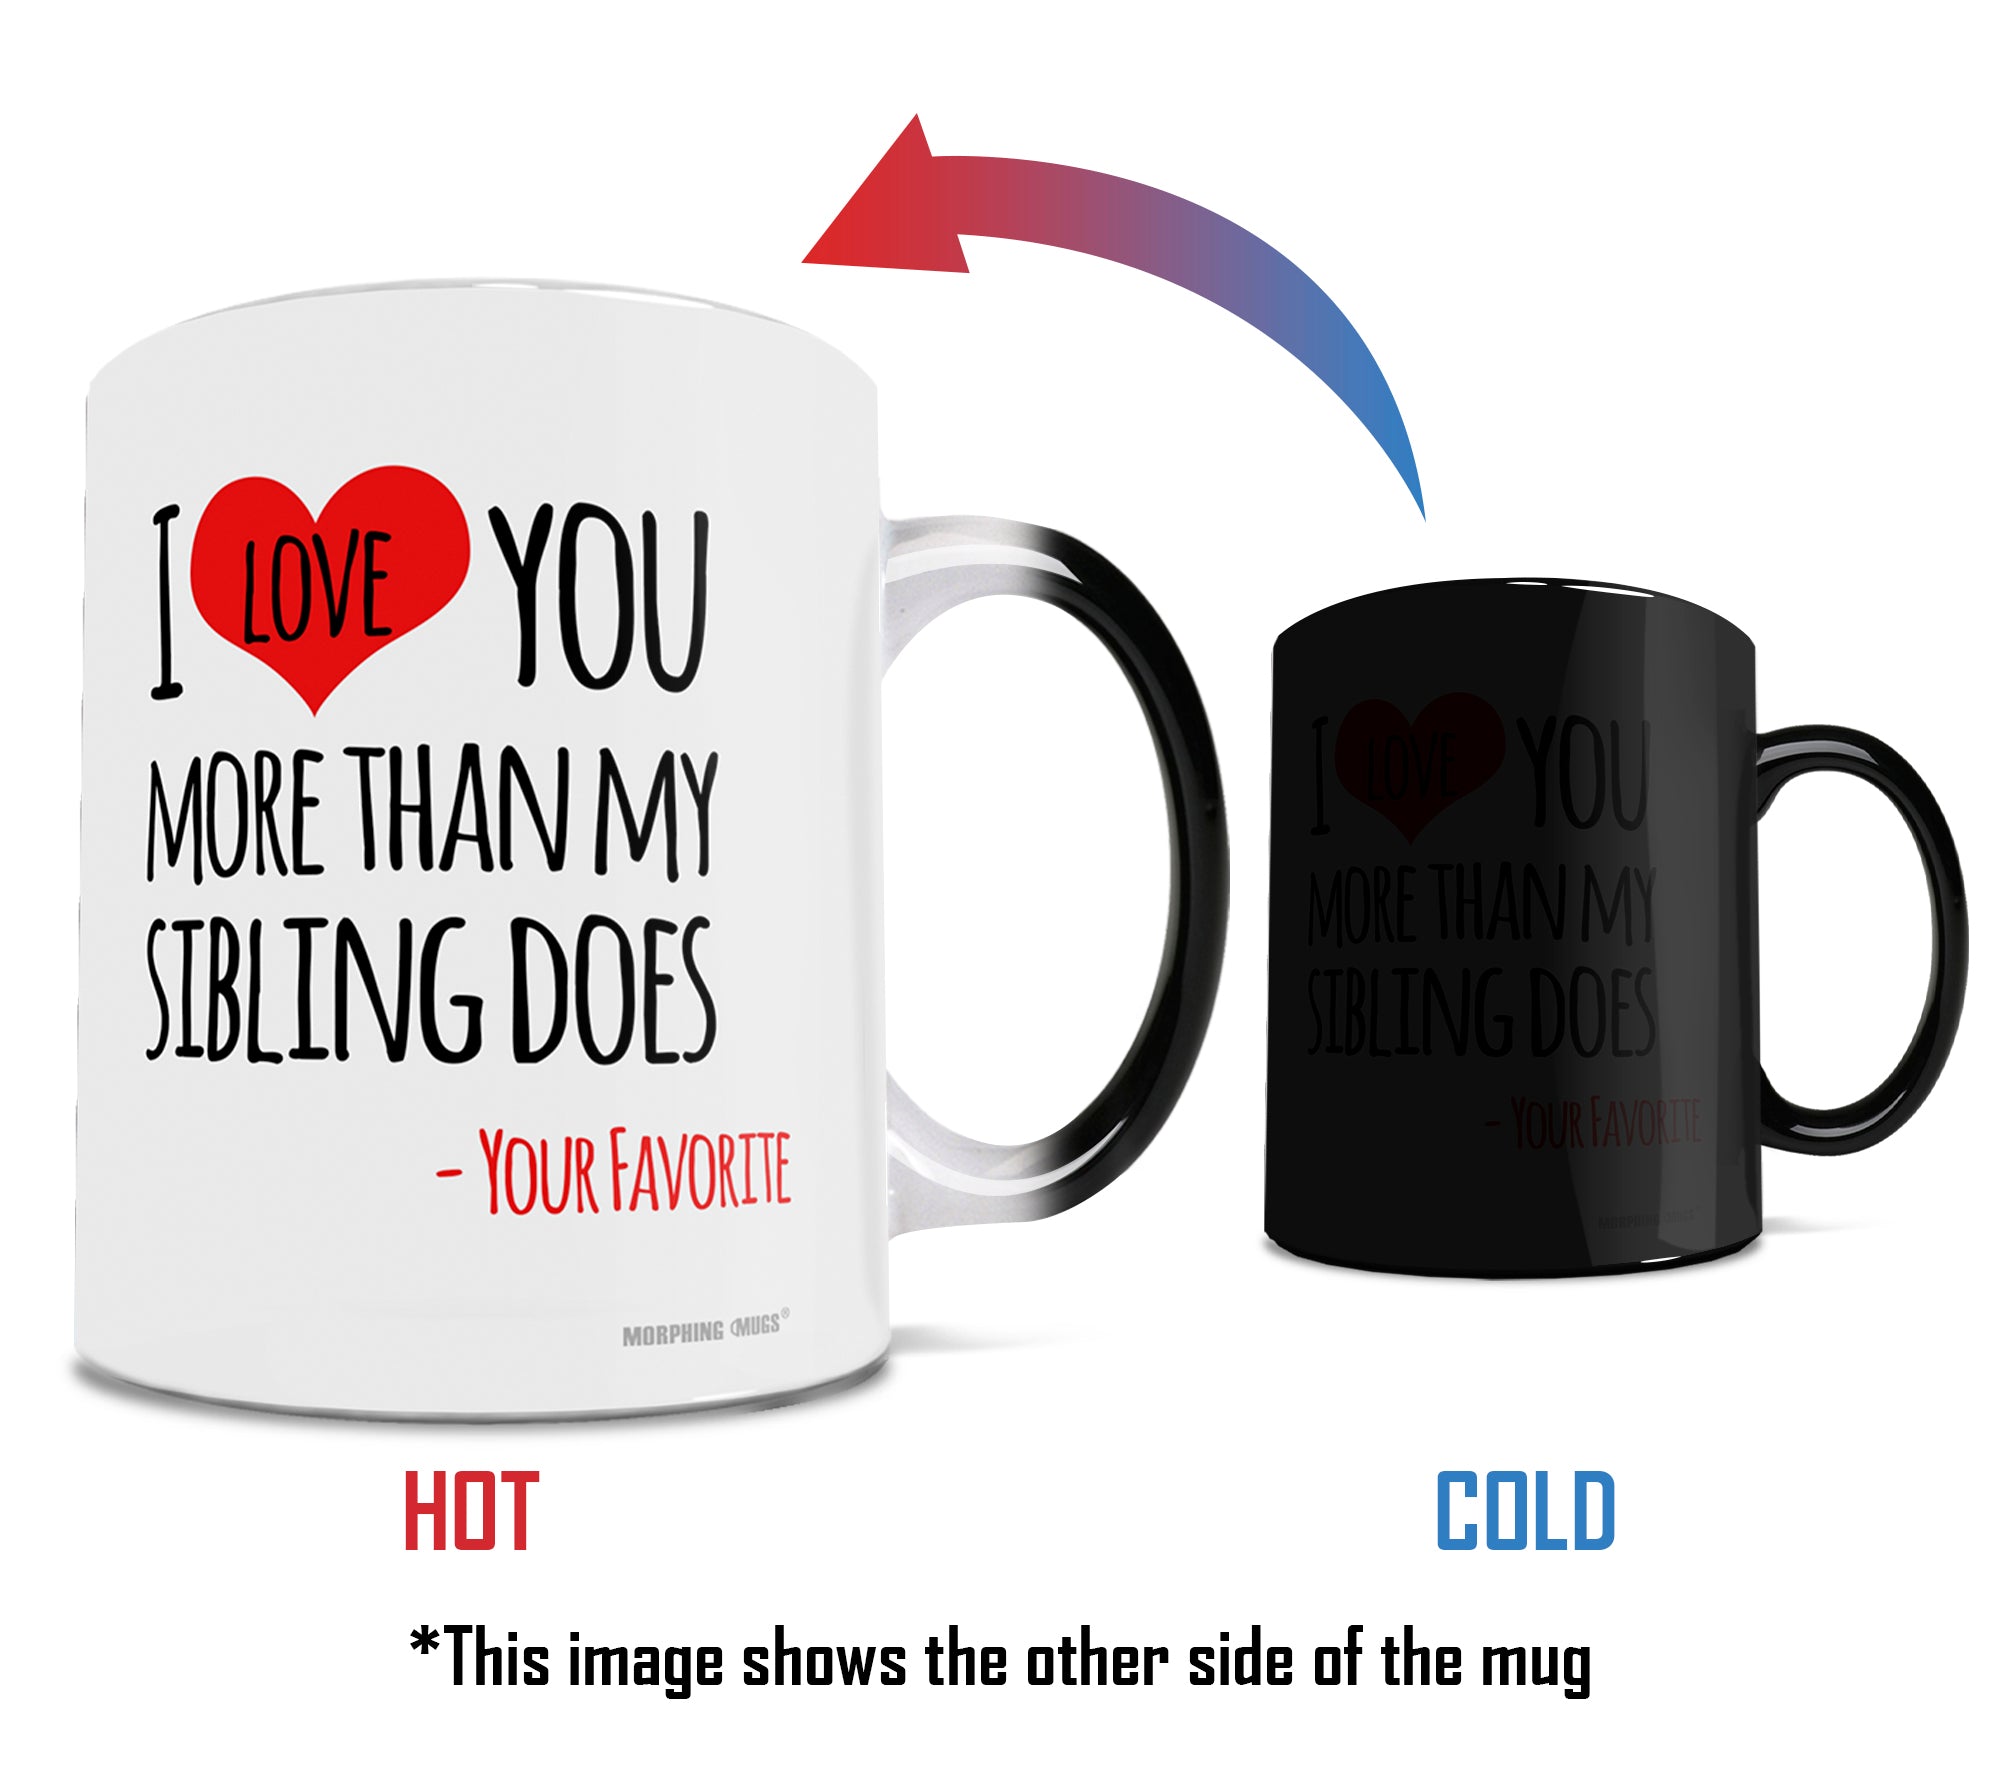 Parent Collection (I Love You More Than My Sibling Does) 11 oz Morphing Mugs® Heat-Sensitive Mug